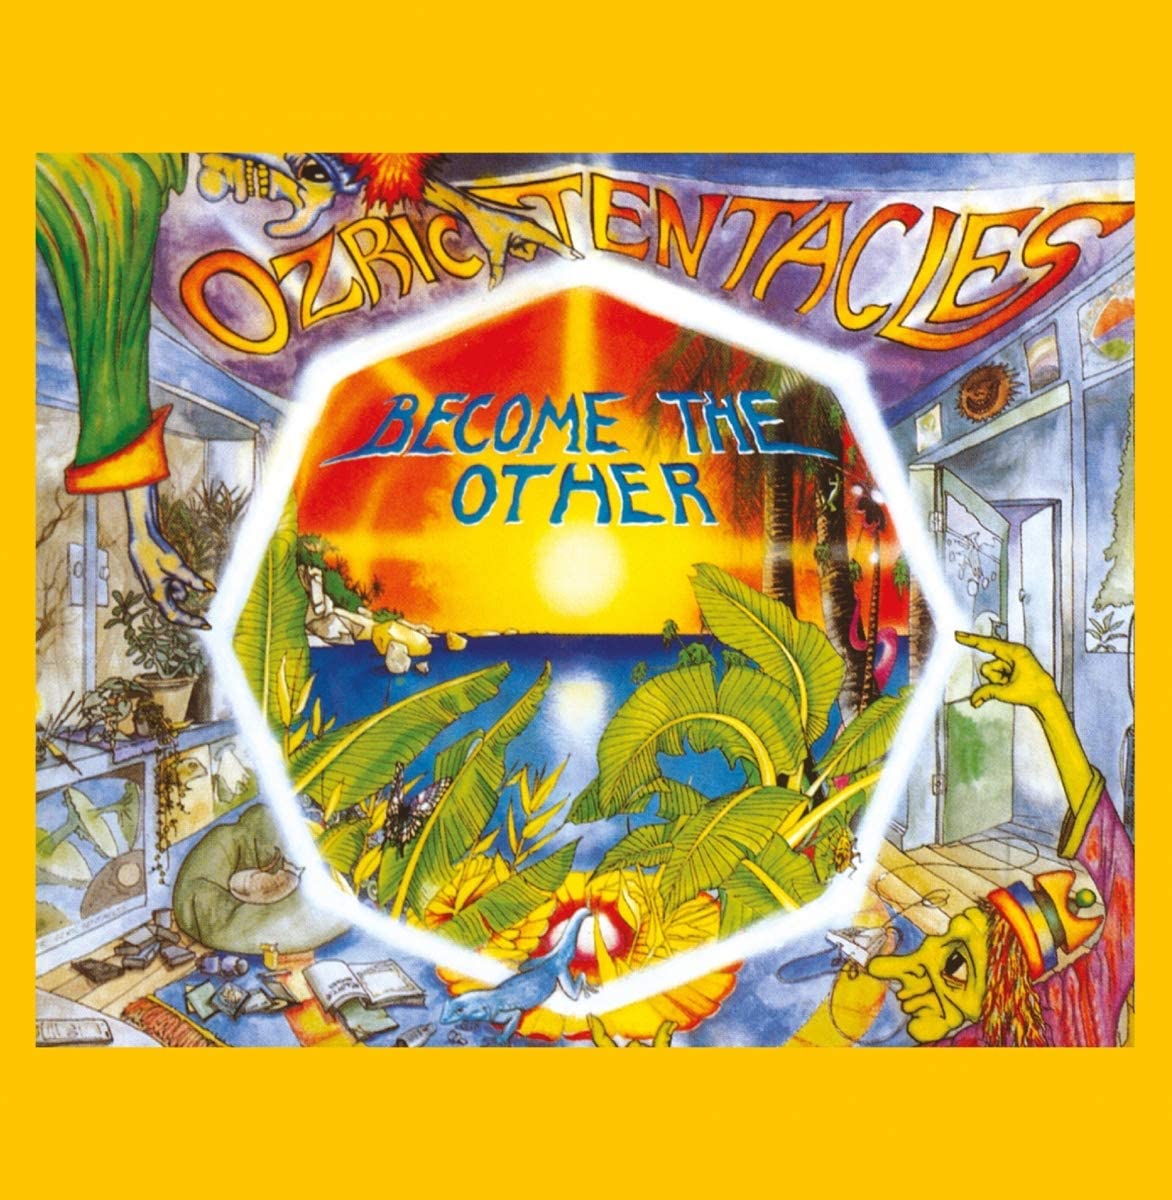 OZRIC TENTACLES - Become The Other - 2LP - Limited Edition Yellow Vinyl